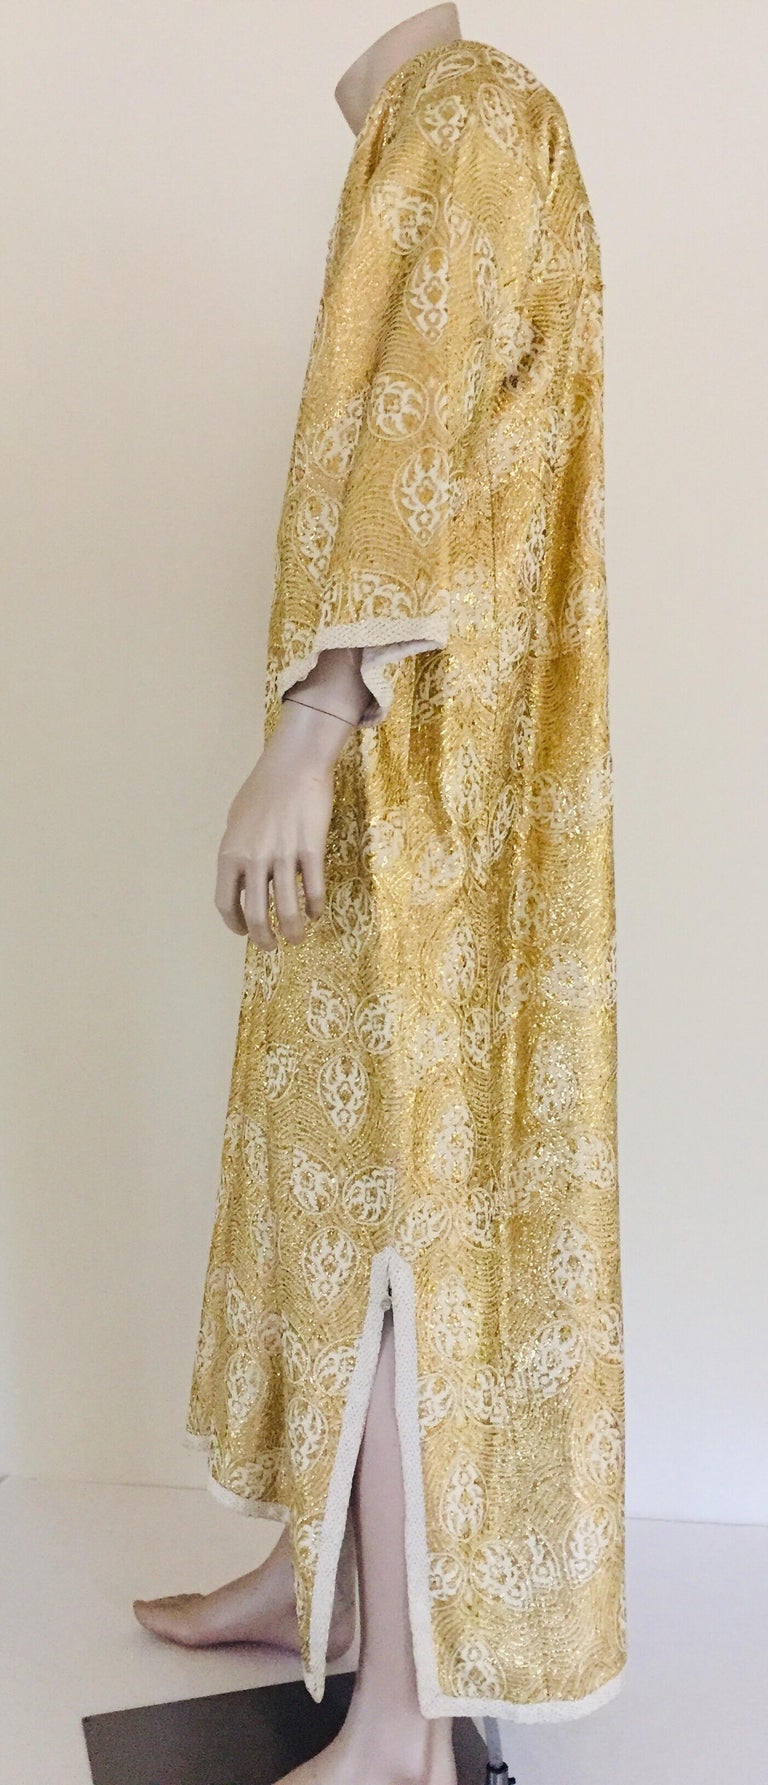 Hand-Crafted Moroccan Caftan in Silver and Gold Brocade Vintage Gentleman Kaftan Circa 1960 For Sale